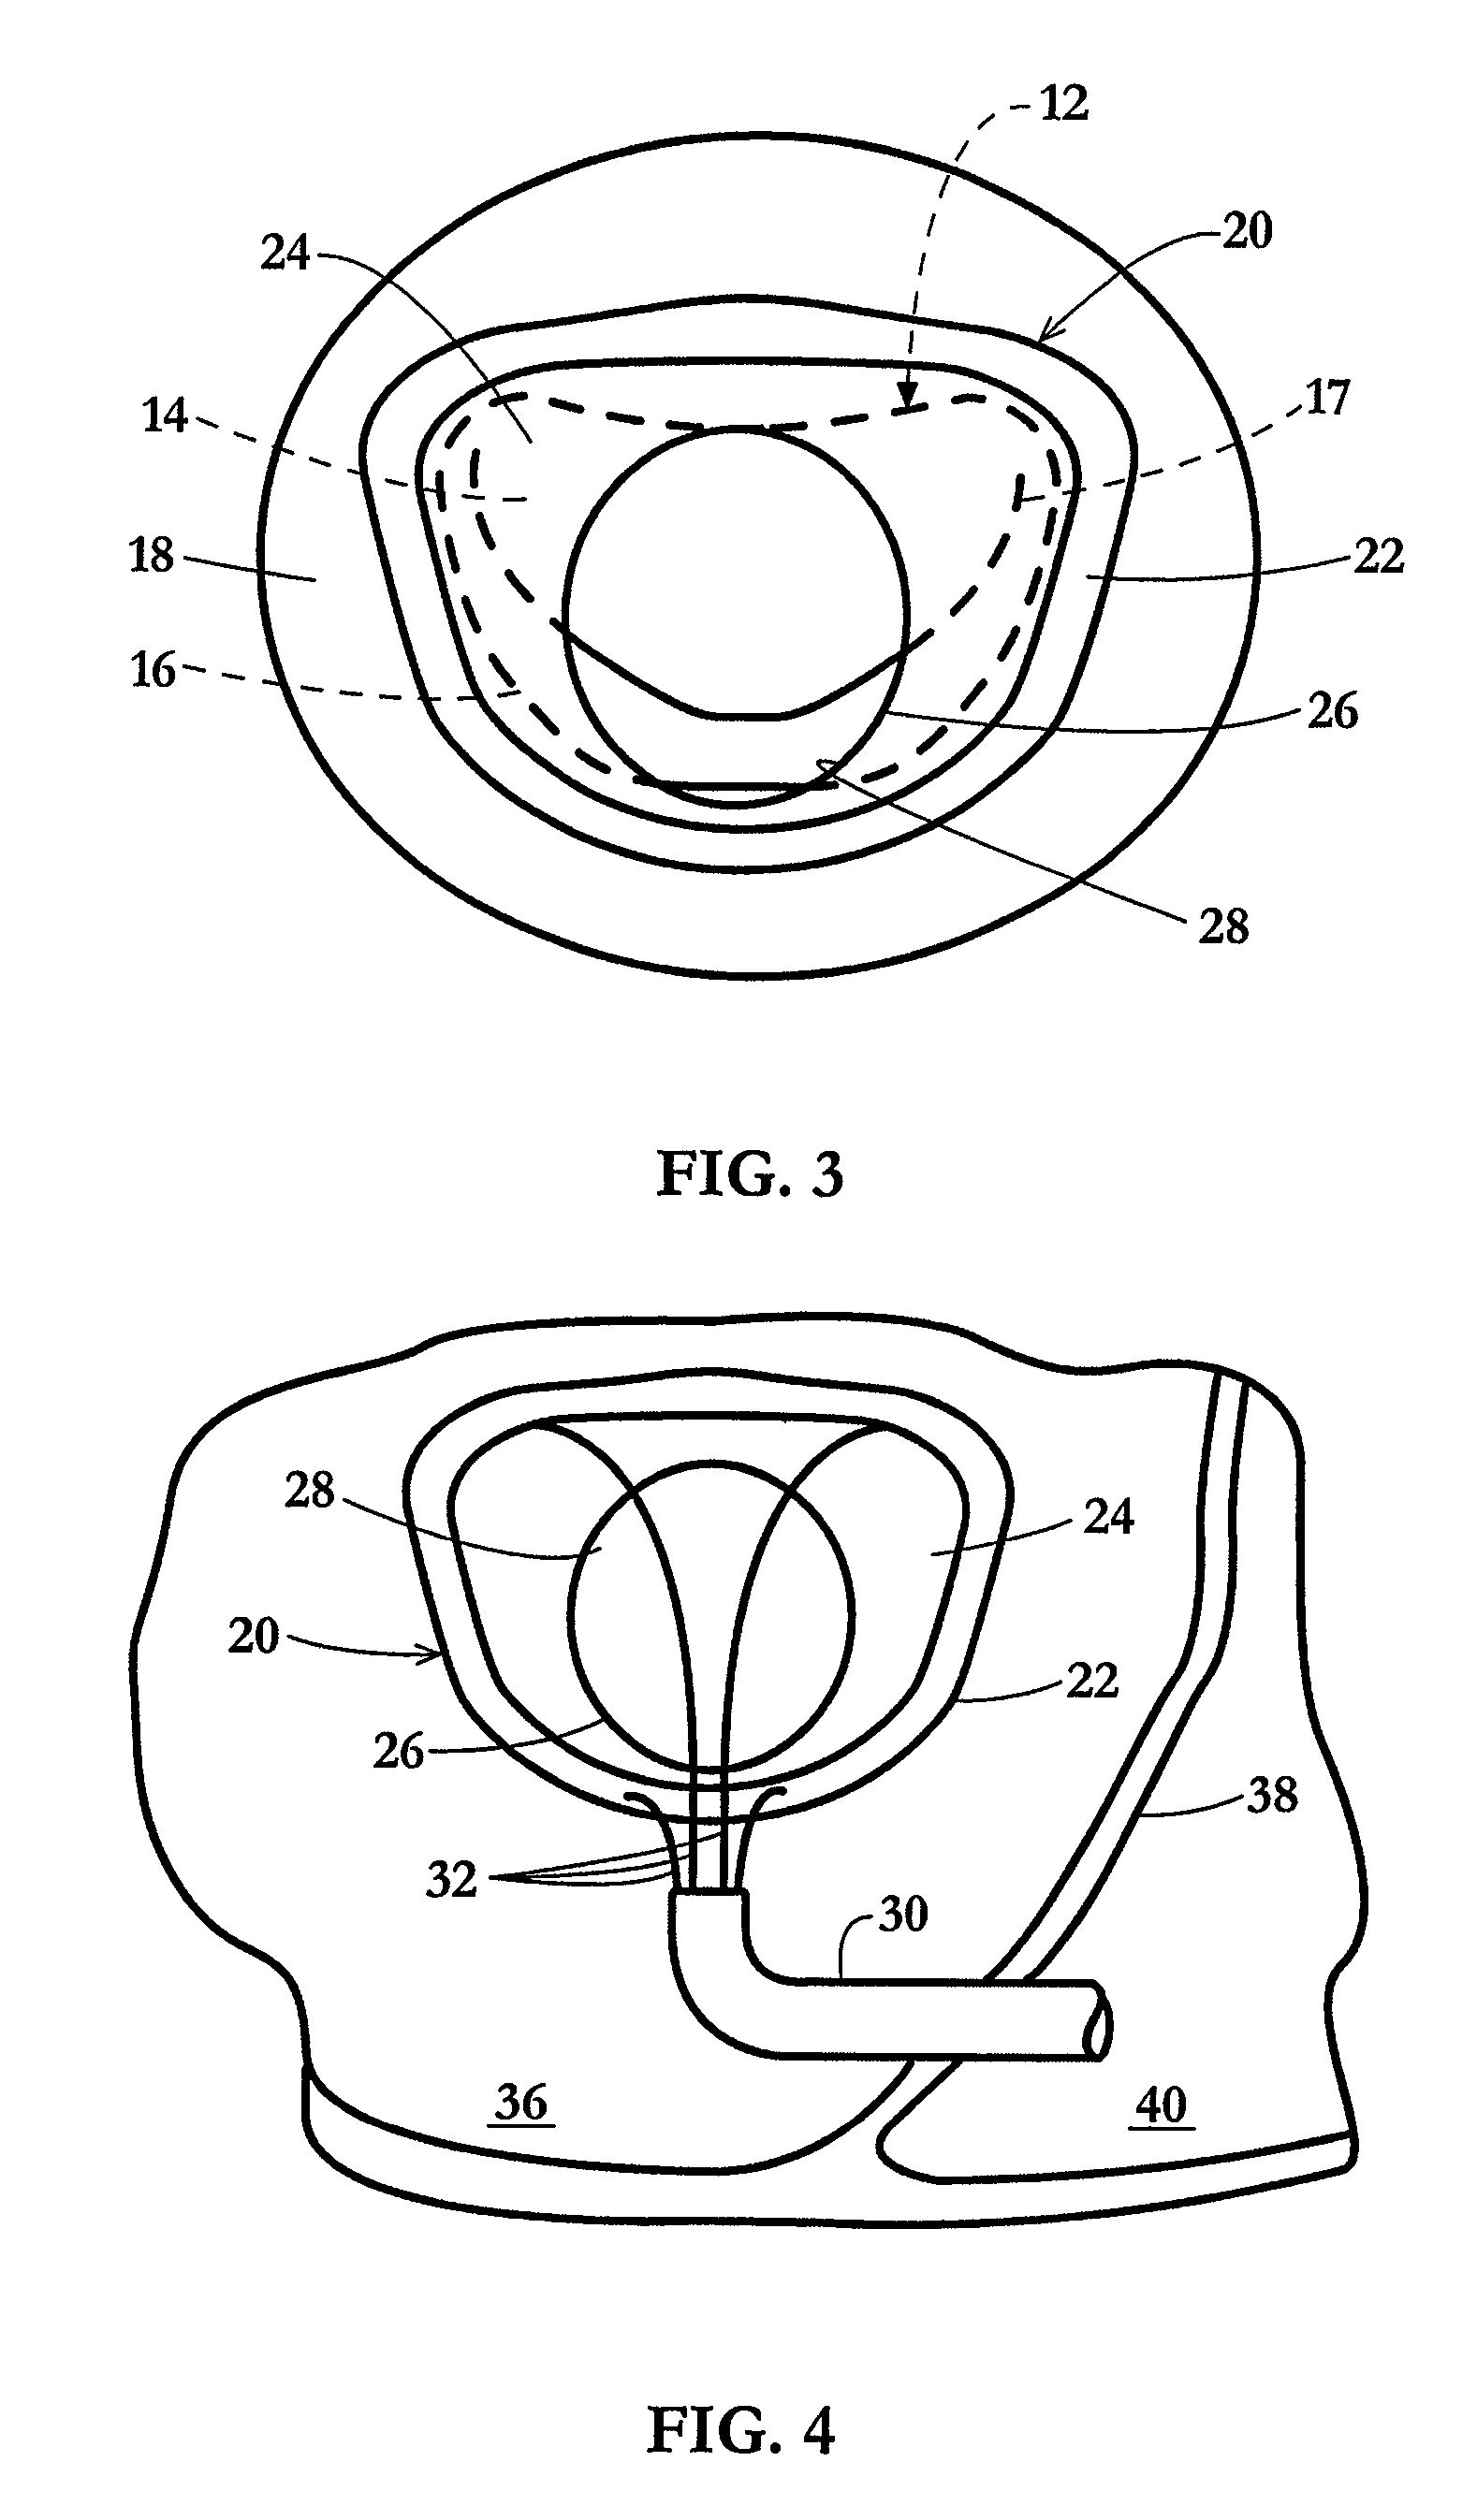 Device and method for temporary or permanent suspension of an implantable scaffolding containing an orifice for placement of a prosthetic or bio-prosthetic valve